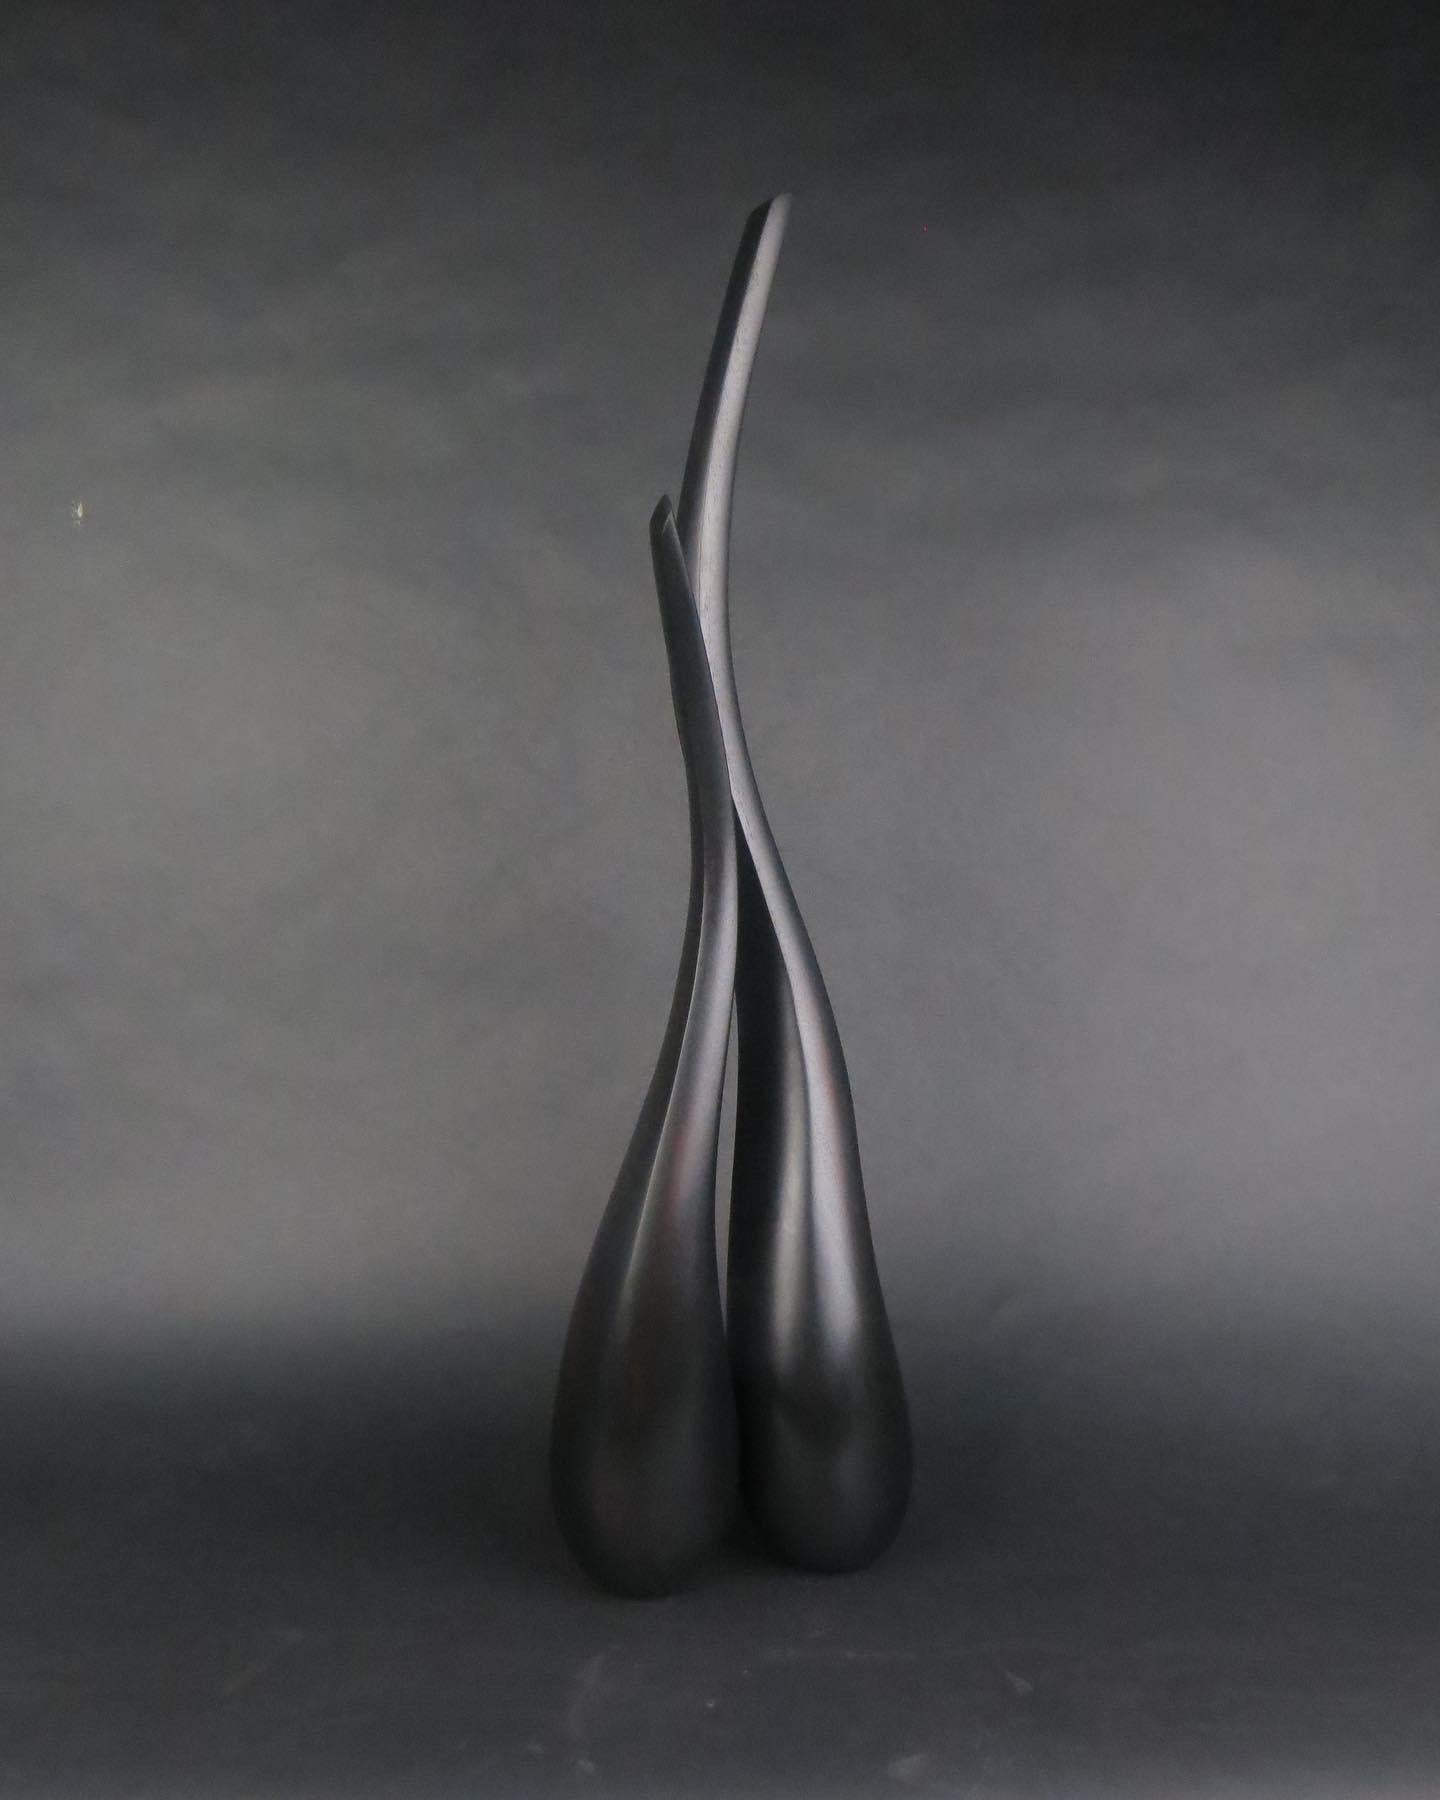 As an artist I strive to create elegant sculptures that capture the true essence of the subject matter. Form, line and surface are used as the visual language. The figure is abstracted to a minimalist form, void of any superfluous information. The